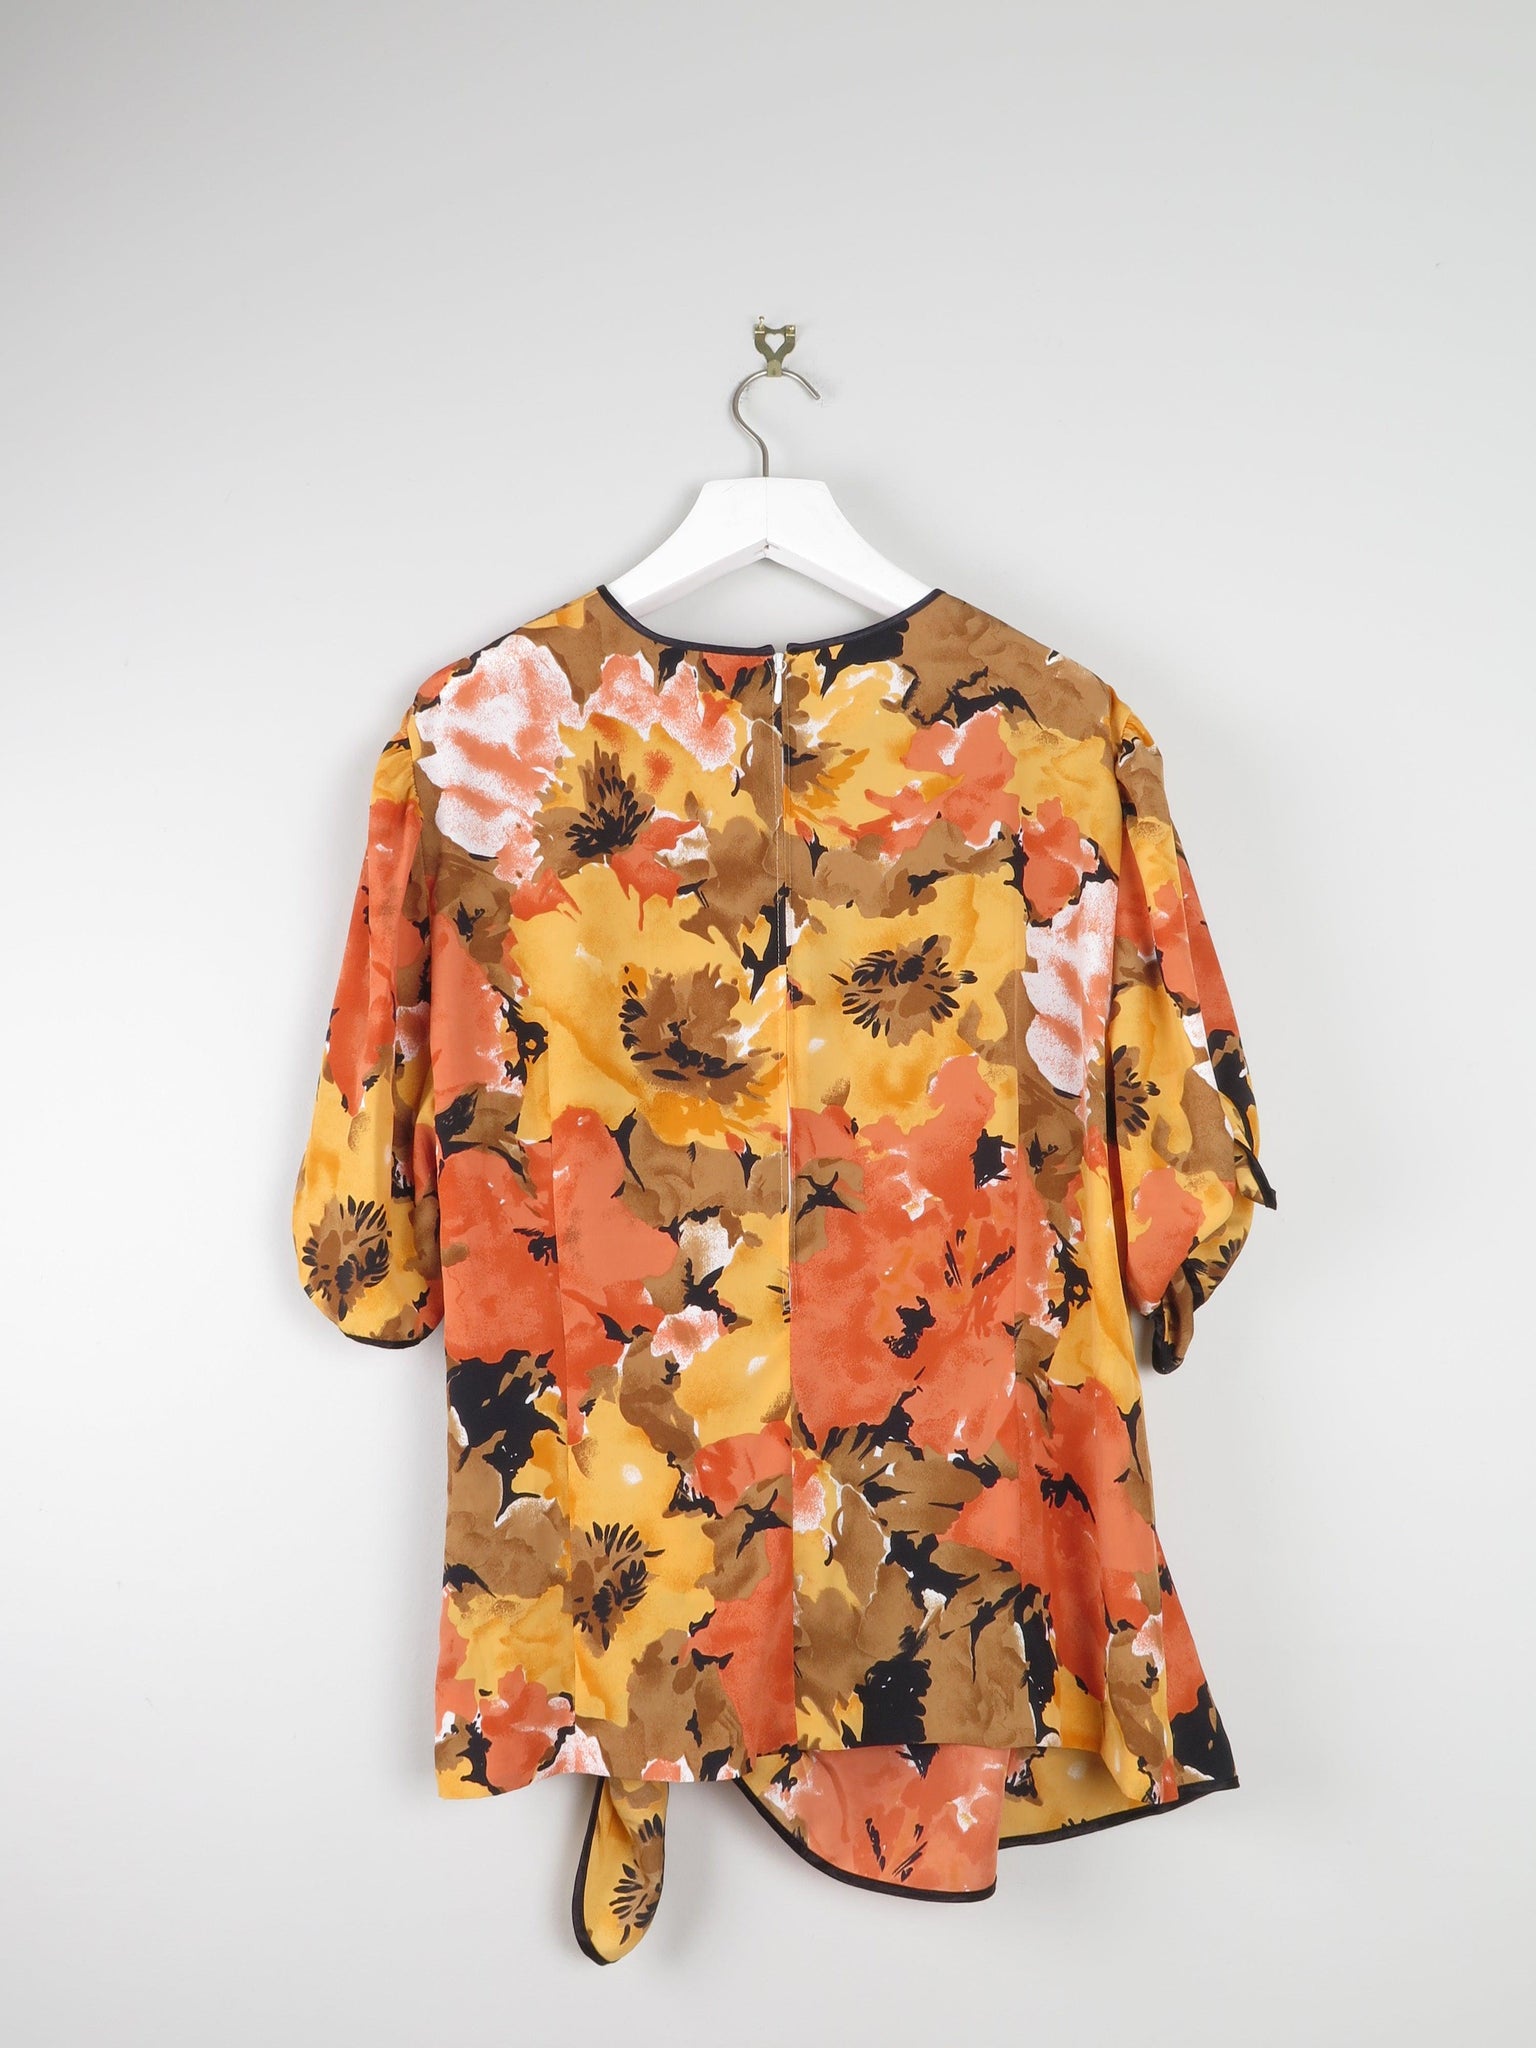 Hardrobe Yellow & Orange Printed Blouse With Crossover Detail L - The Harlequin